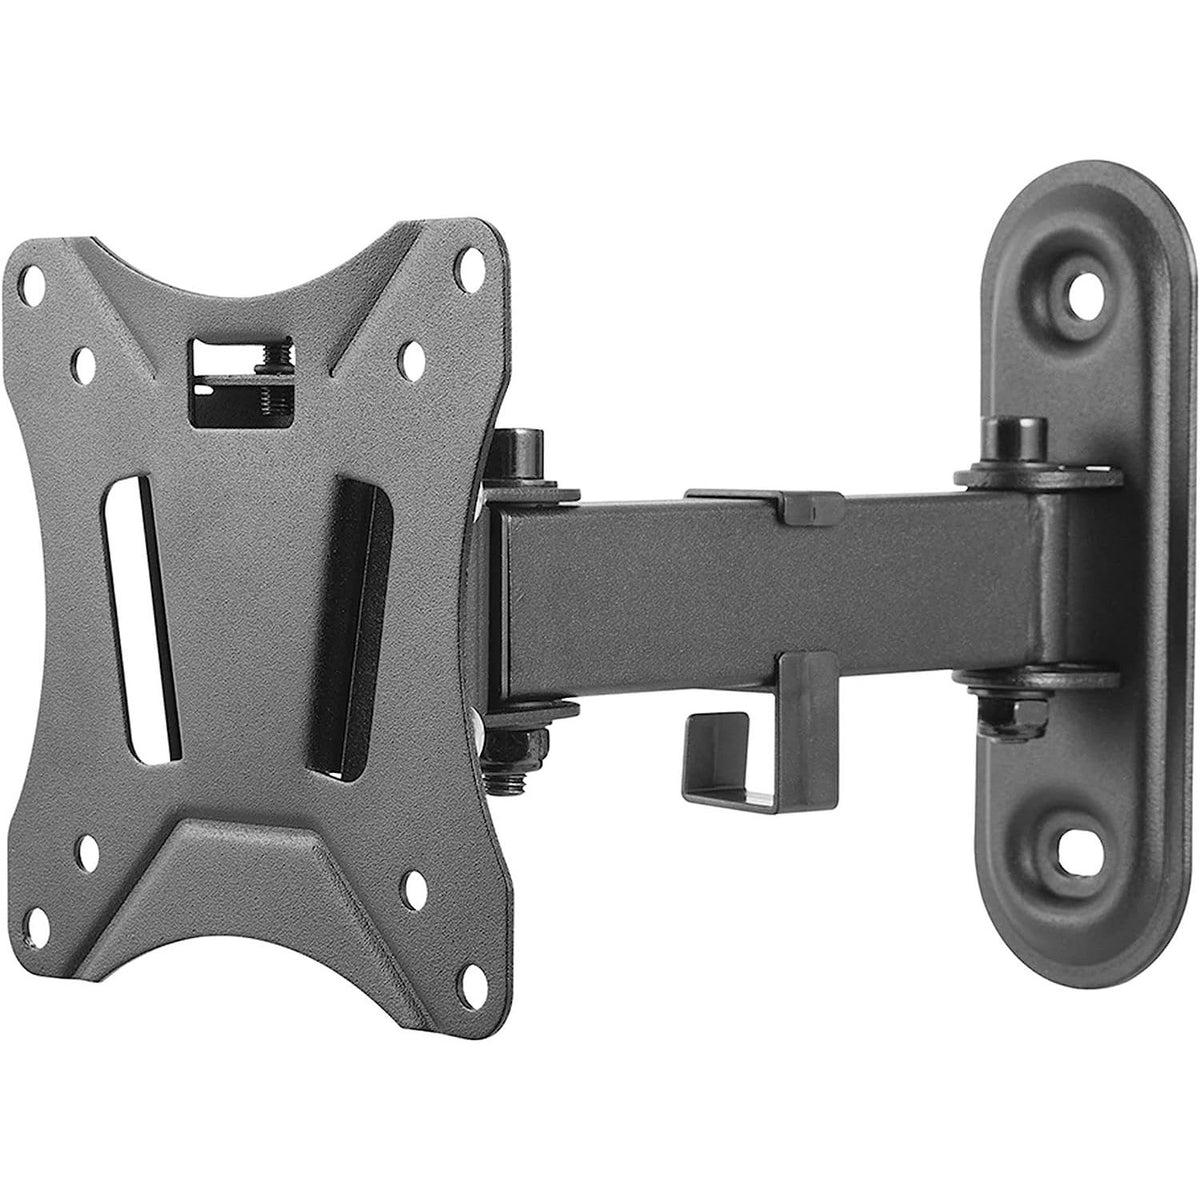 Deltaco 13&quot; to 27&quot; Display Full-Motion 2-Way Wall Mount - Black | ARM0250 from Deltaco - DID Electrical